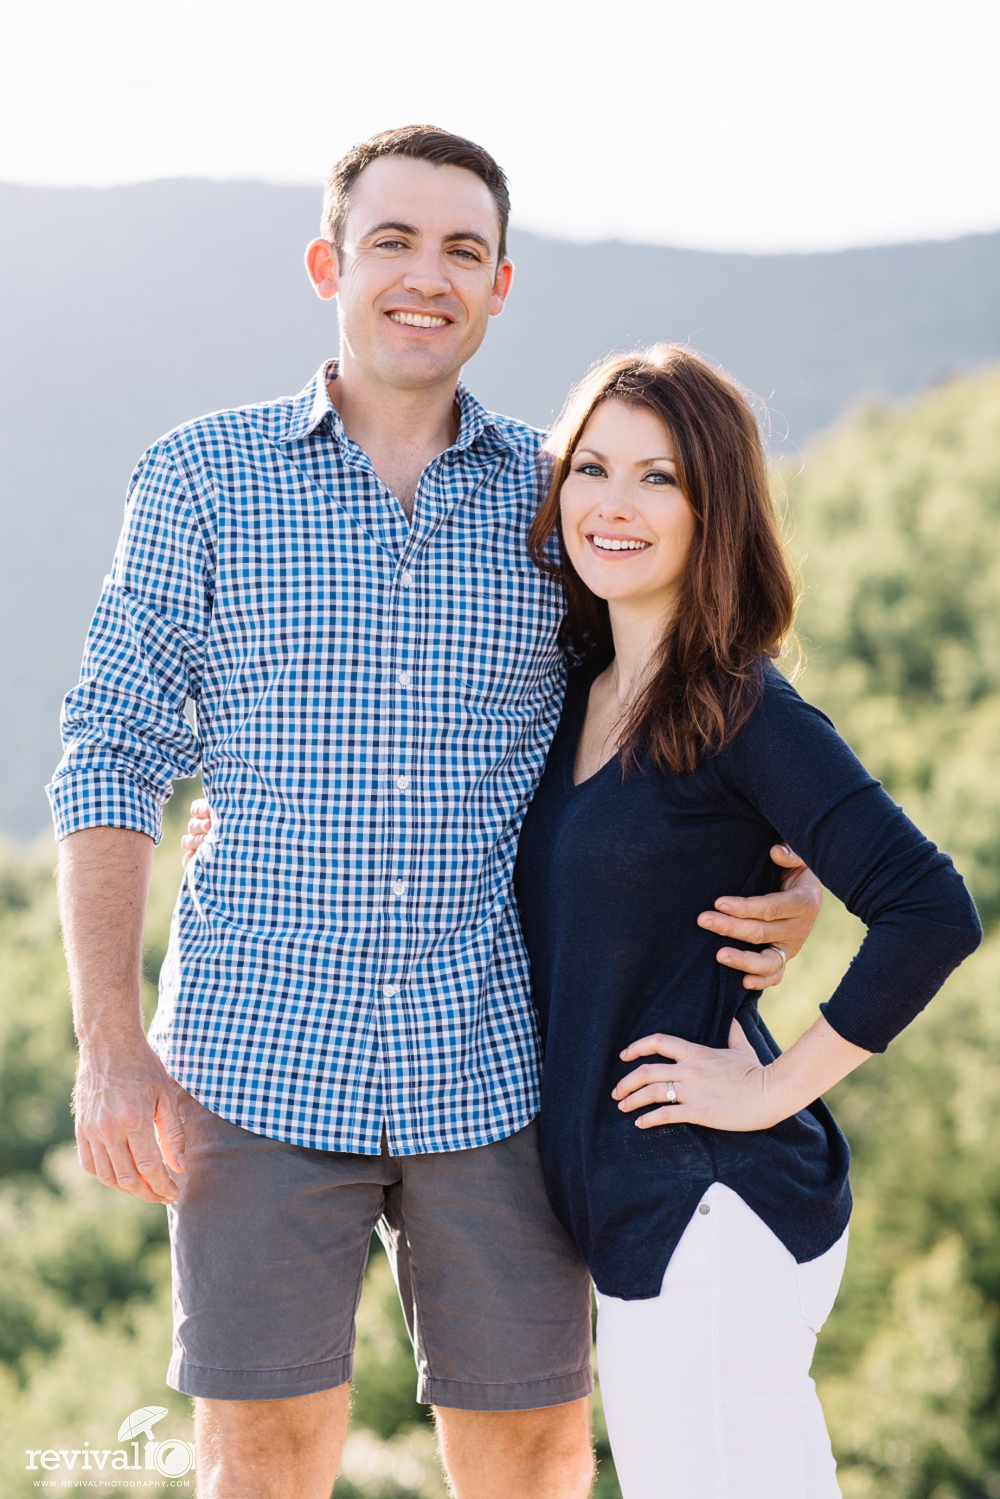 Amy + Troy: An Engagement Session on the Blue Ridge Parkway by Revival Photography www.revivalphotography.com